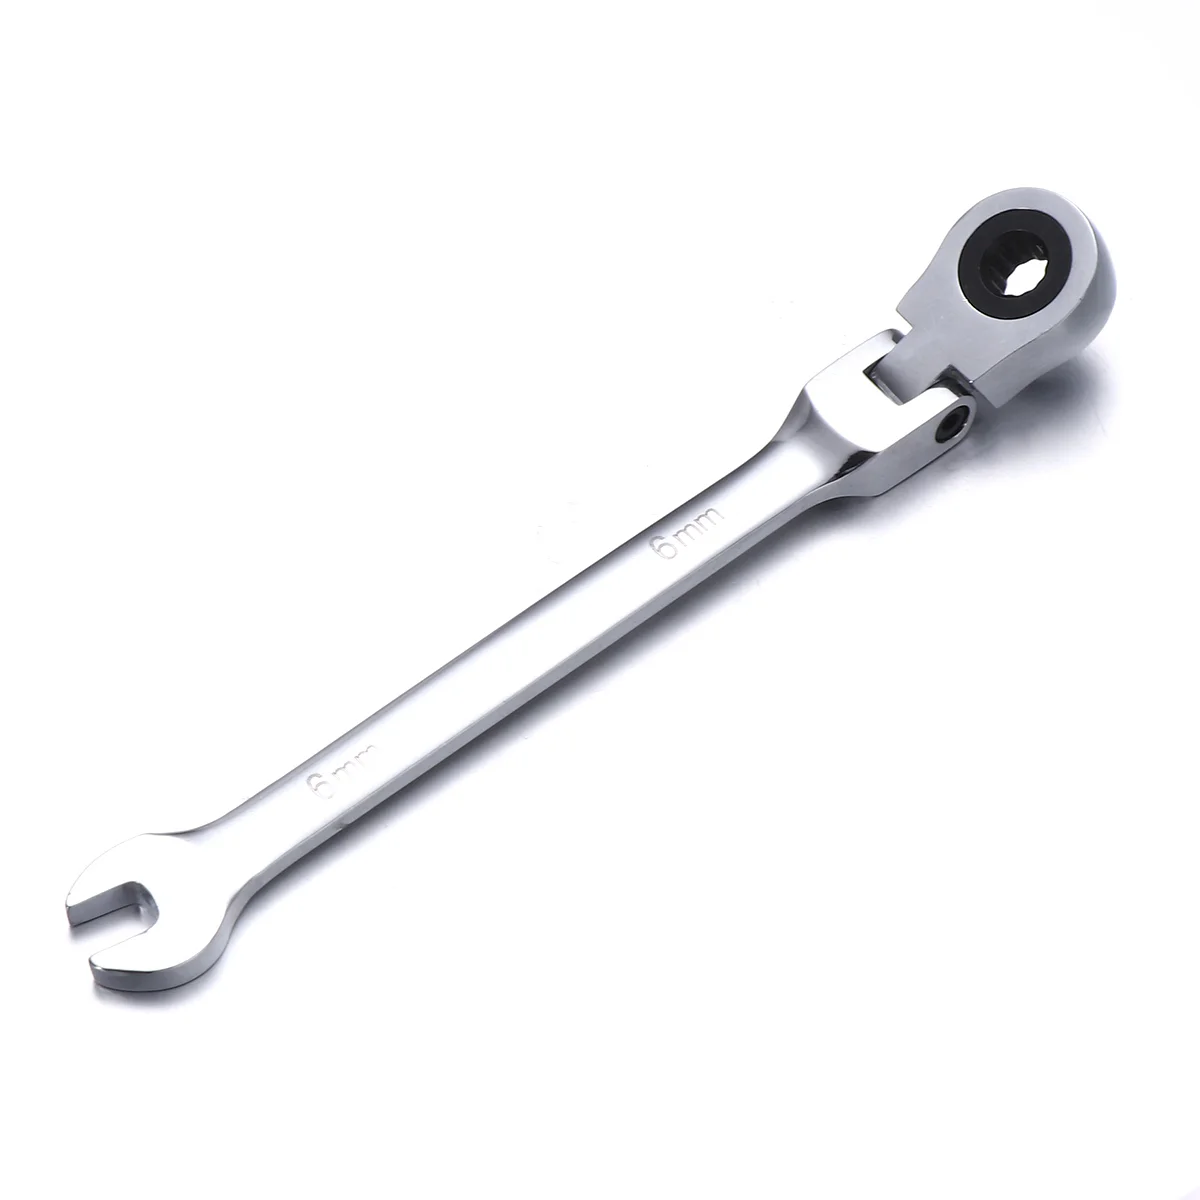 

6mm Dual Heads Ratchet 180 Degree Flexible Pivoting Head Adjustable Combination Dicephalous Wrench Spanner (Silver) Tool set